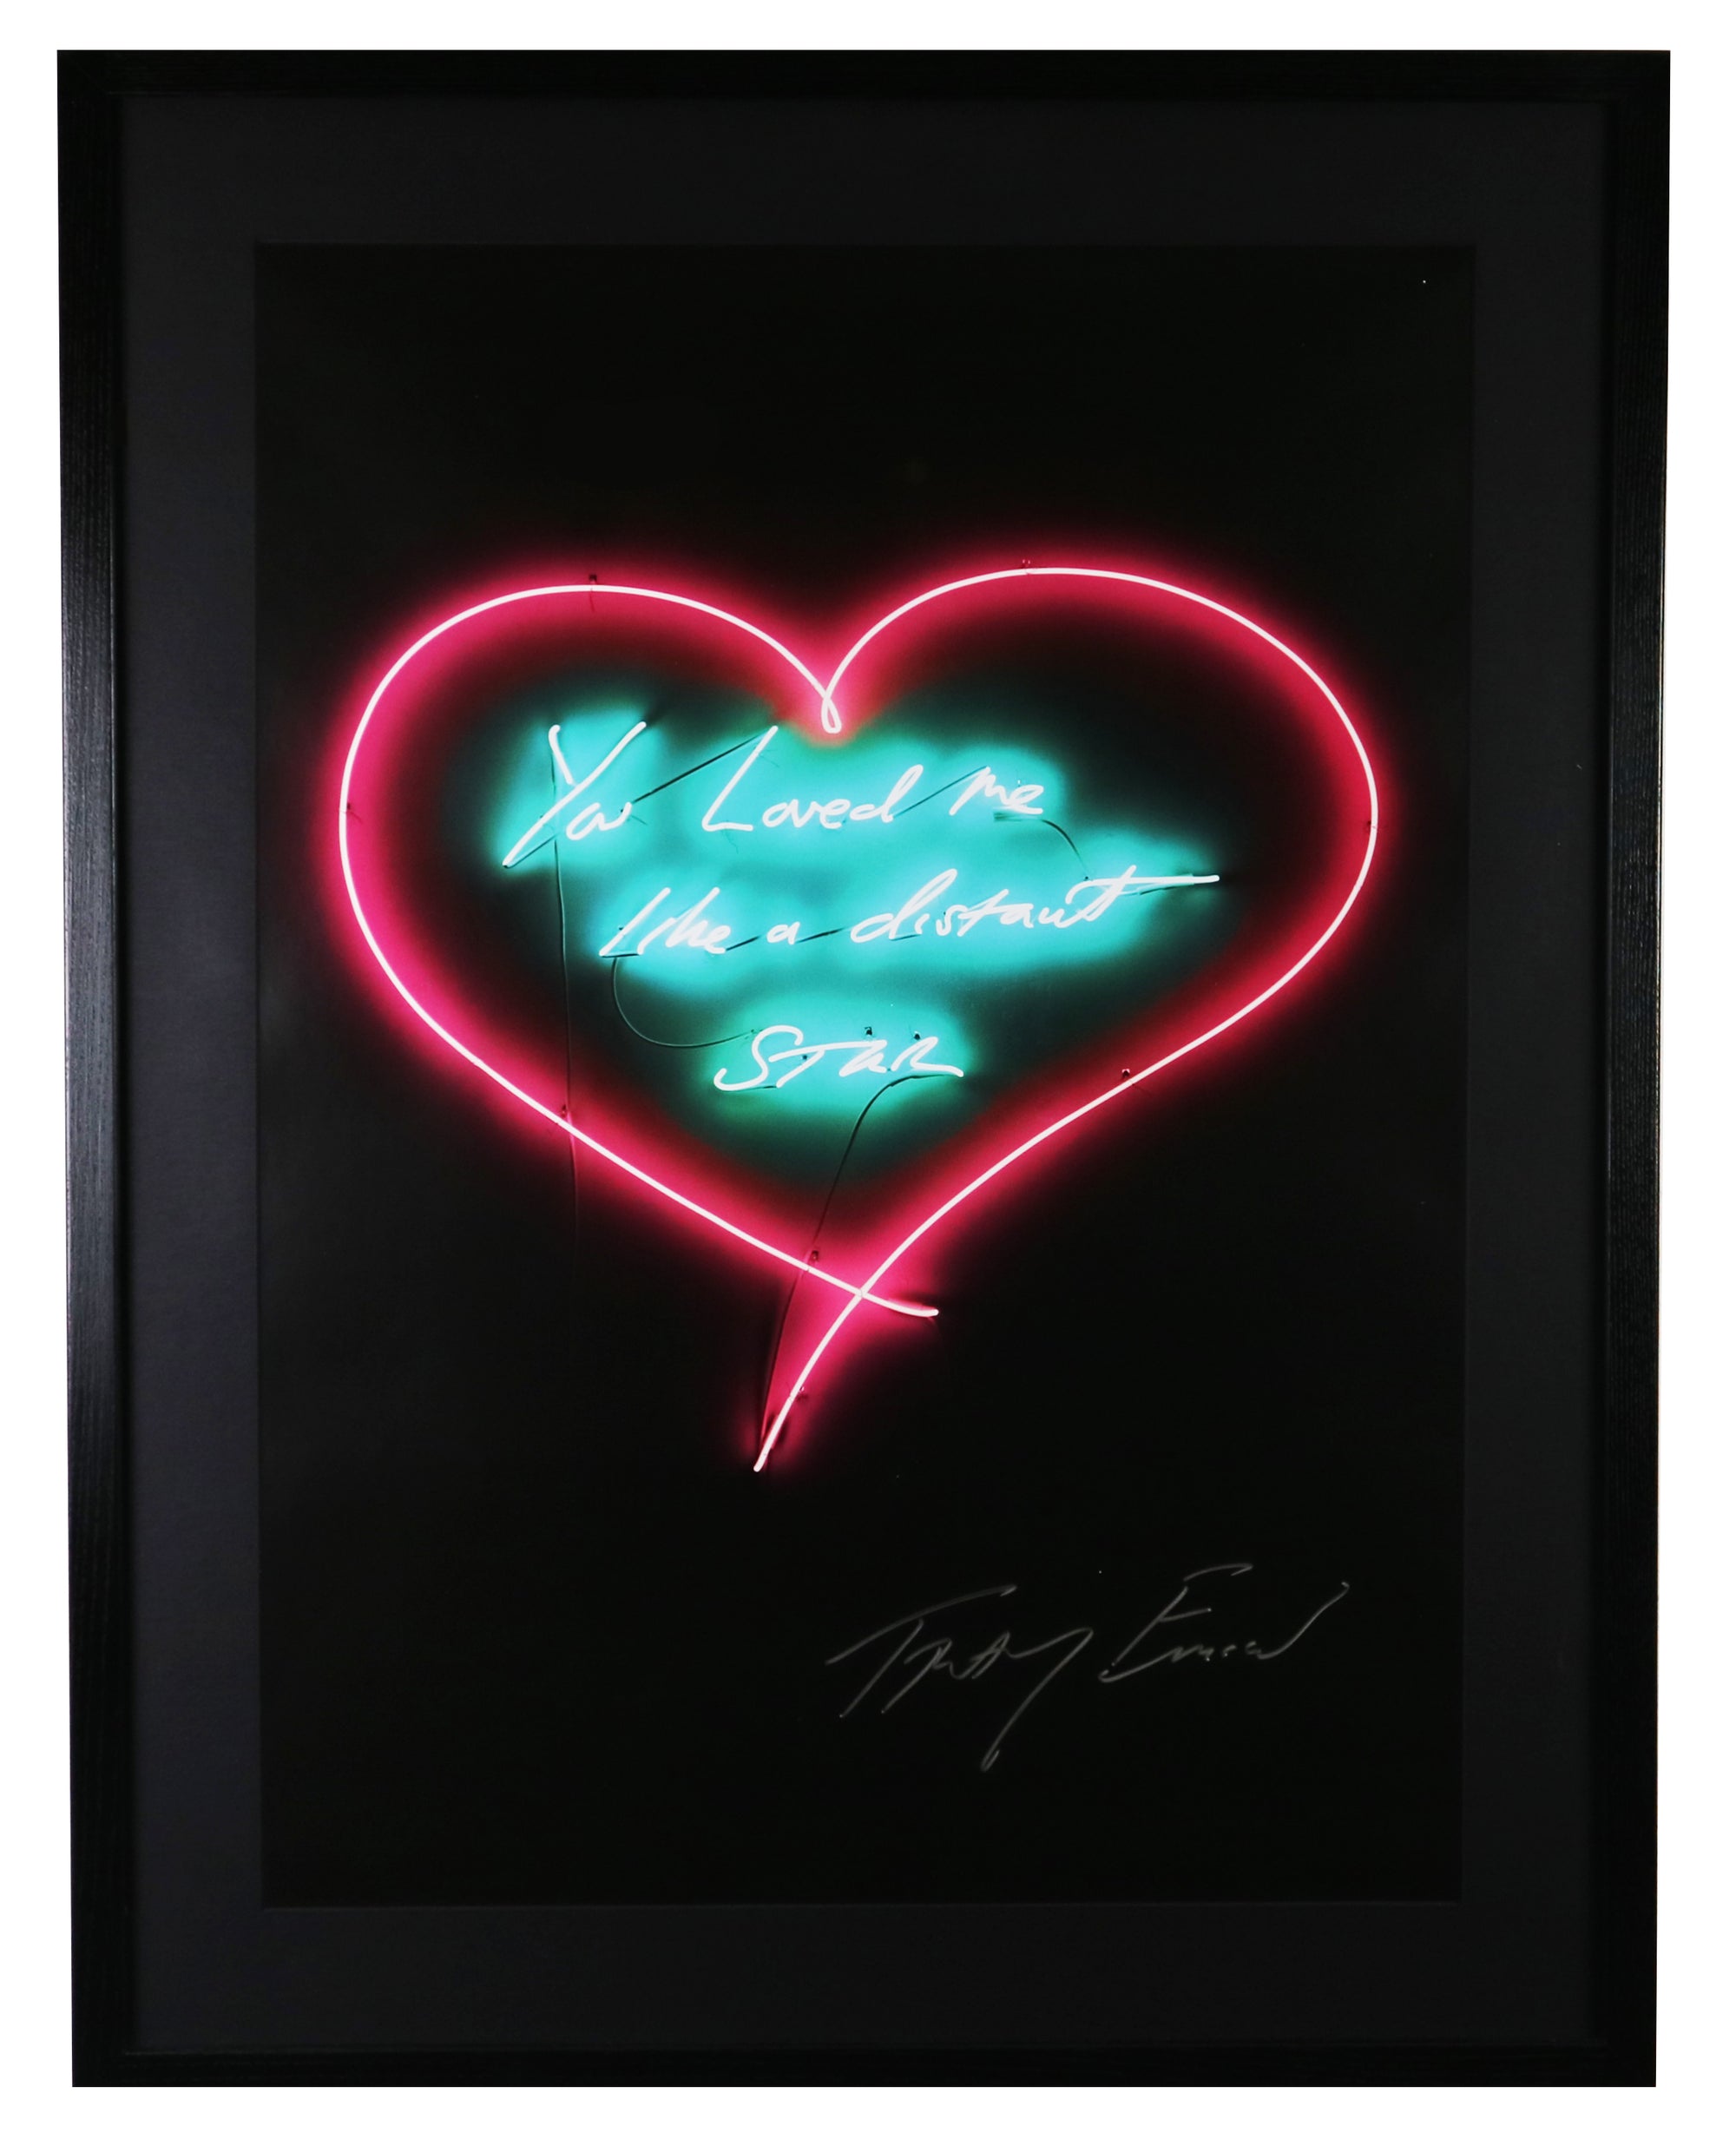 Tracey Emin - You Loved Me Like A Distant Star (Framed)